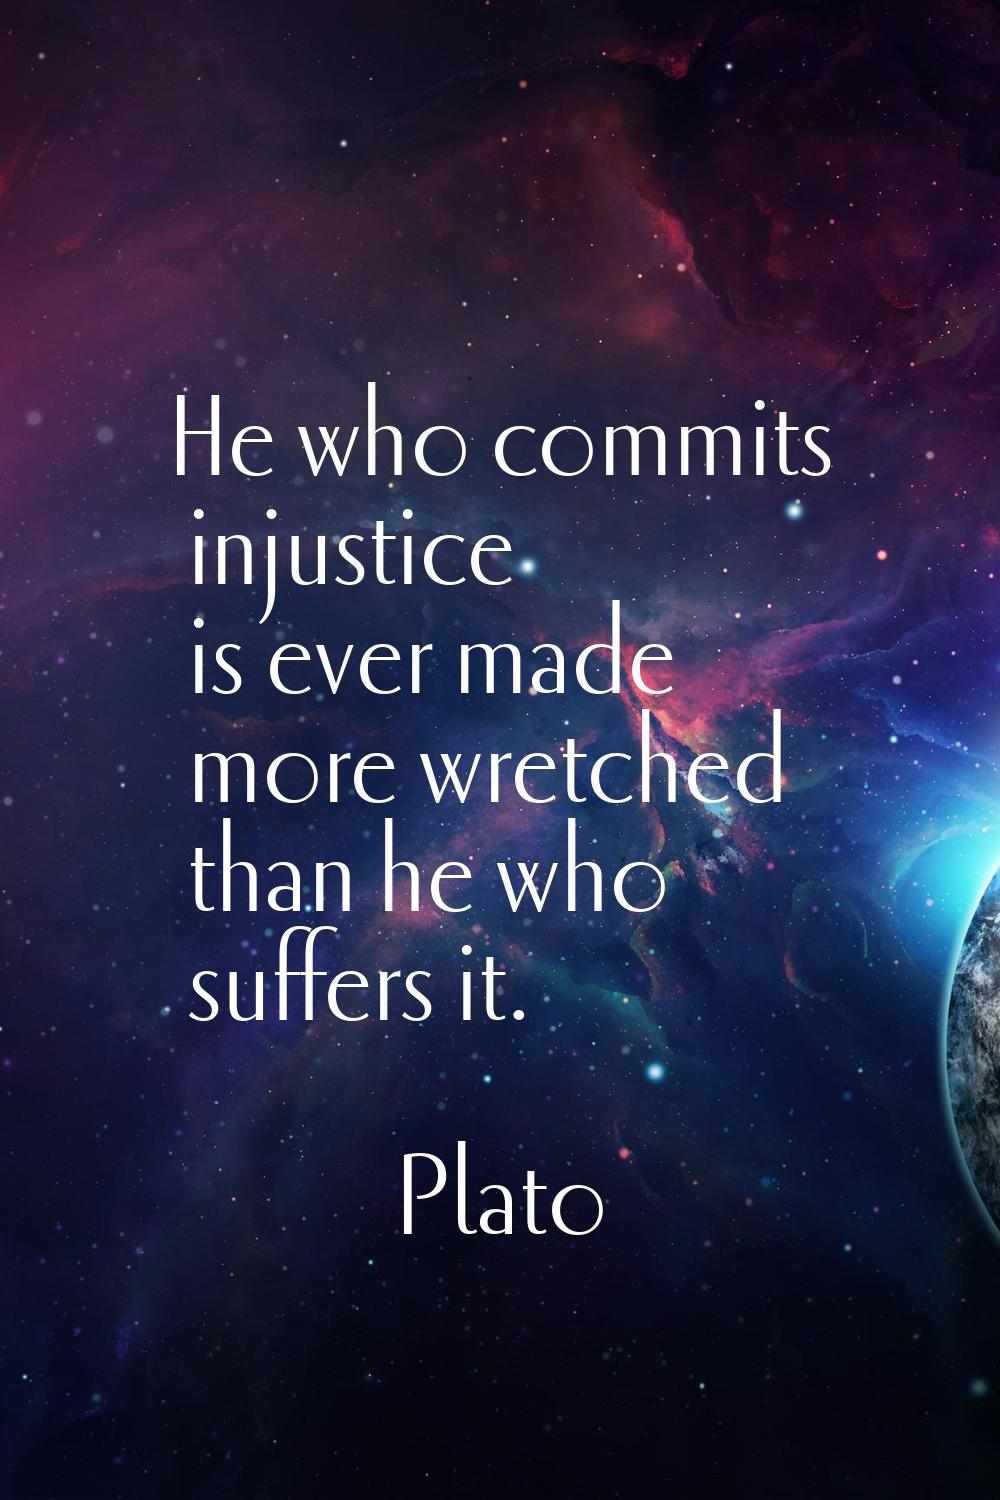 He who commits injustice is ever made more wretched than he who suffers it.